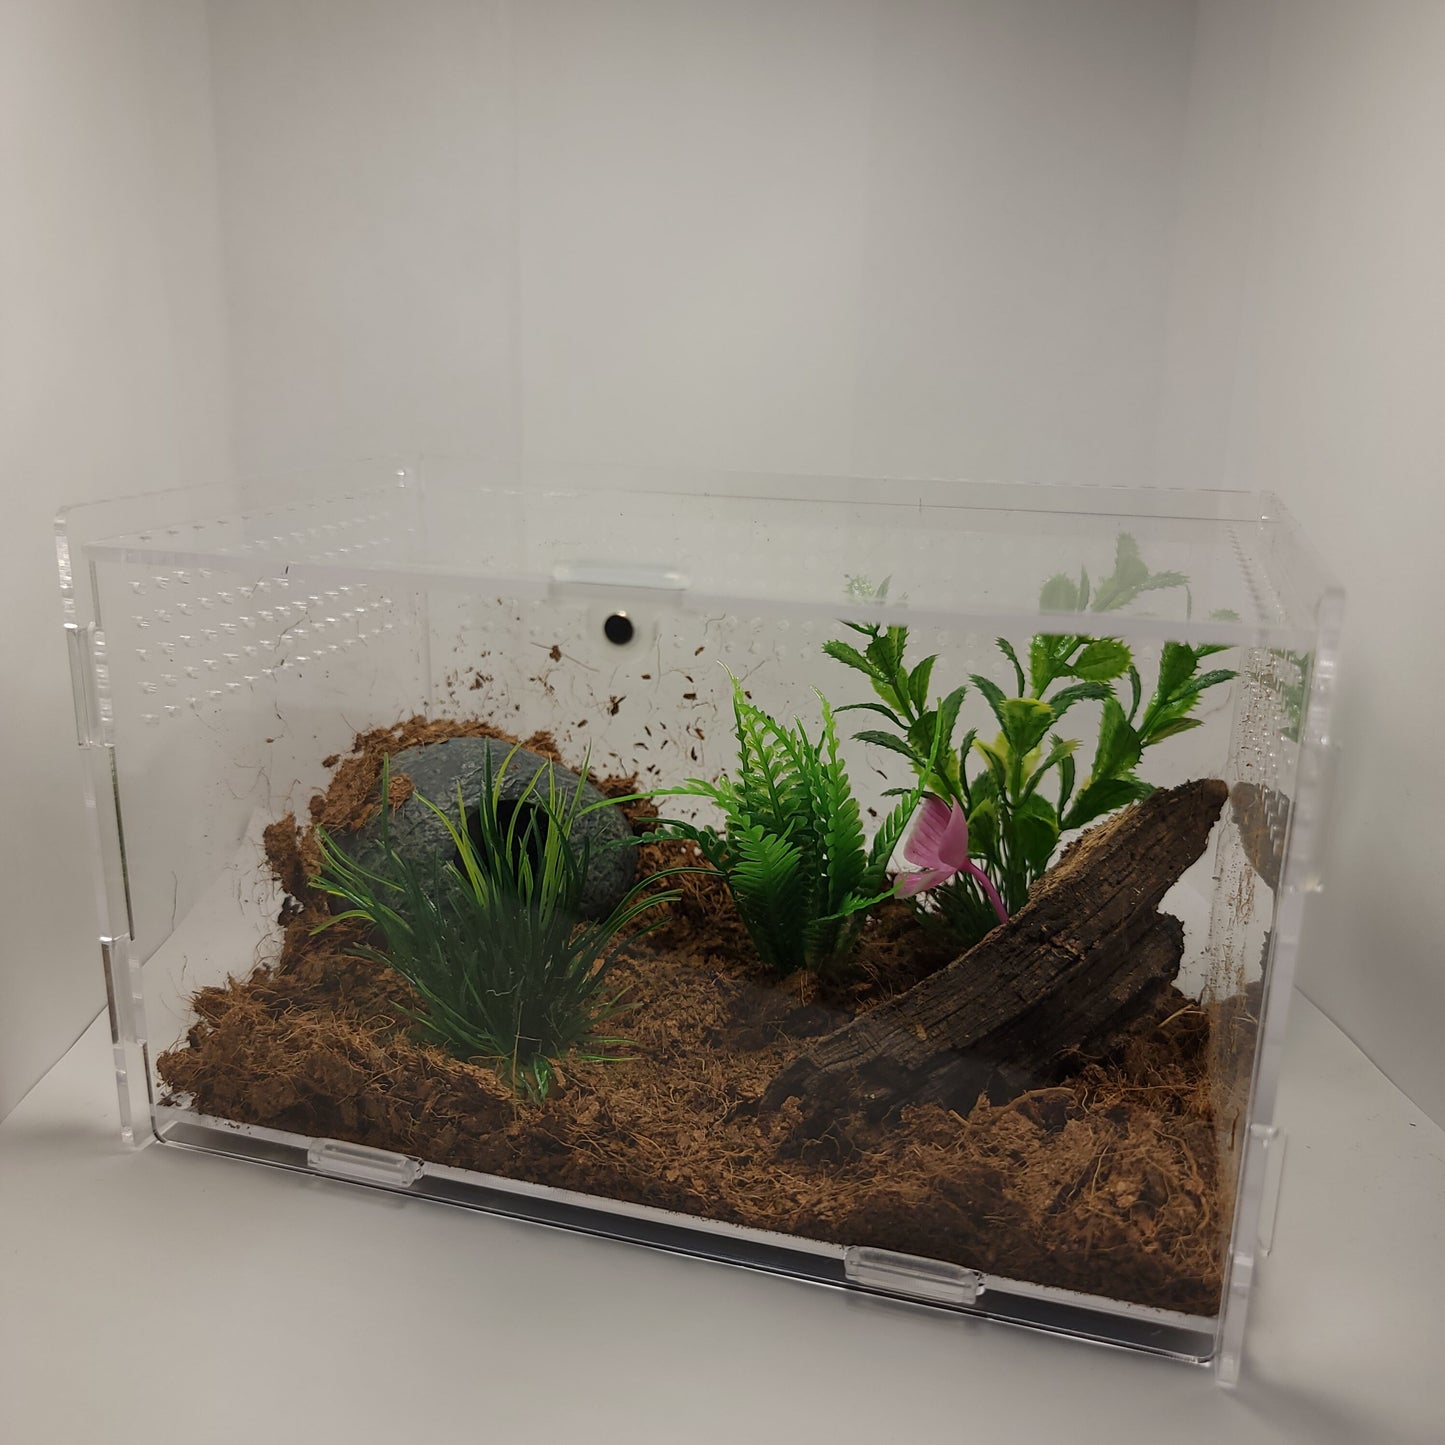 4"x4"x7" Acrylic Enclosure | The Critters Cave